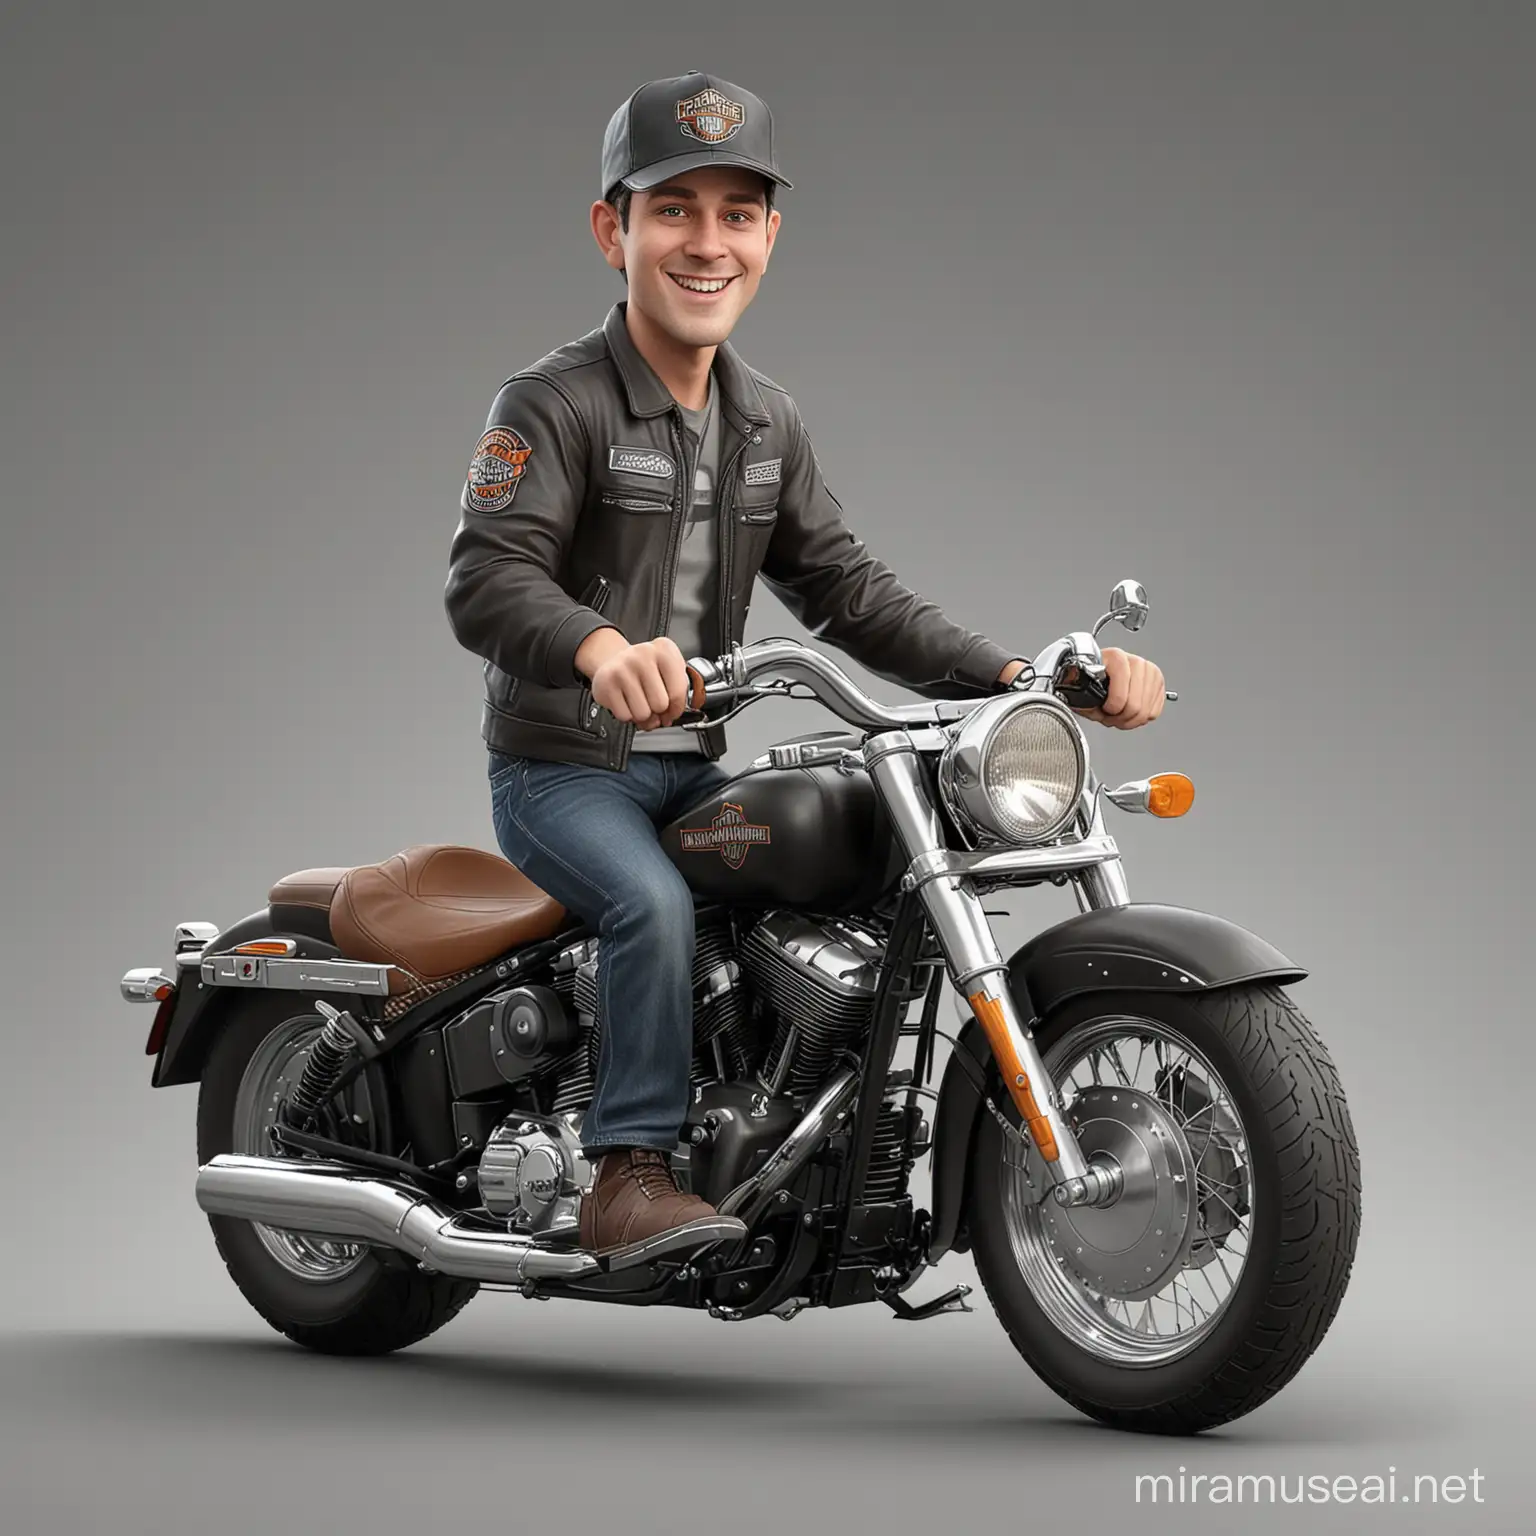 Young Man Riding Harley Davidson Motorcycle in Photorealistic 3D Cartoon Style